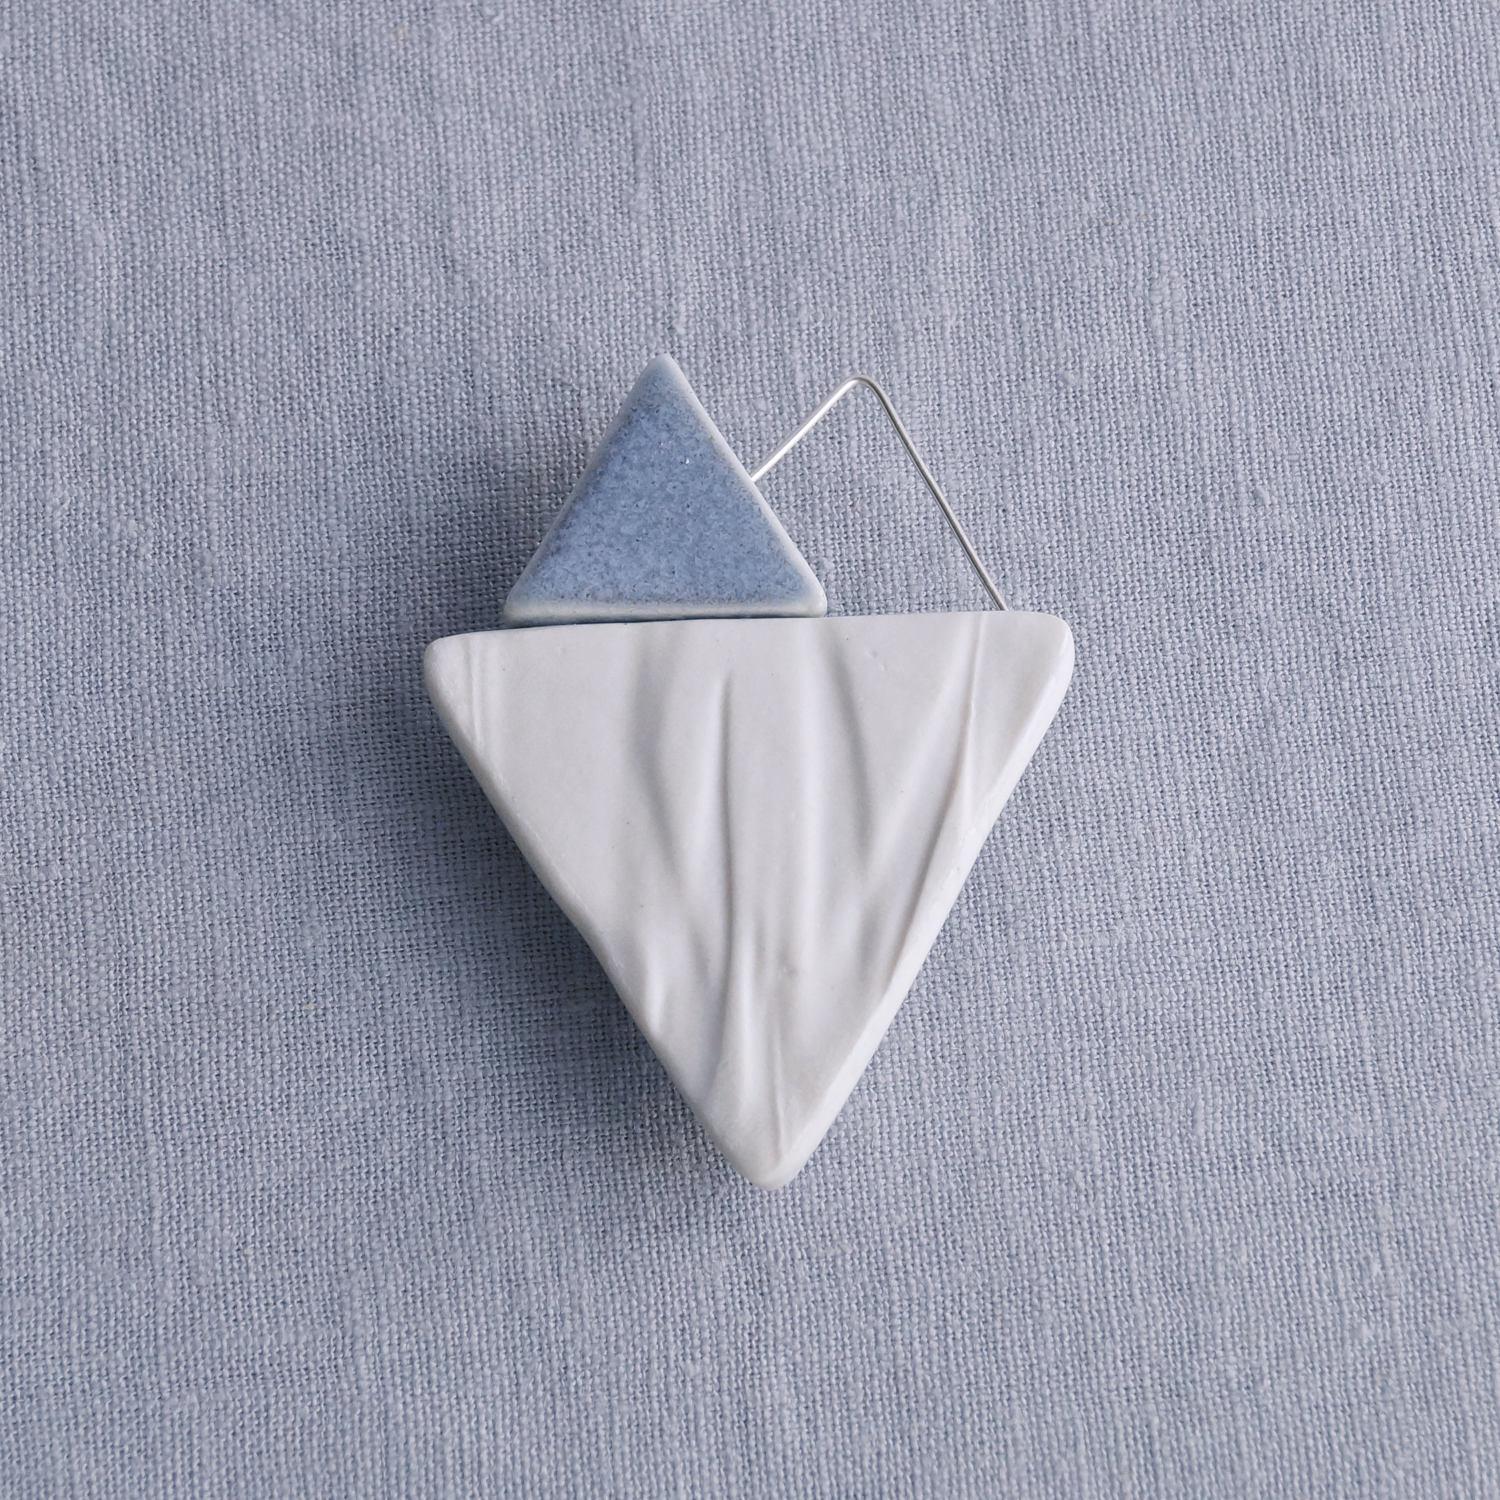 Ruched No 9, grey, porcelain brooch, sterling silver wire, VanillaKiln, abstract heart brooch, geometric brooch, porcelain jewellery,